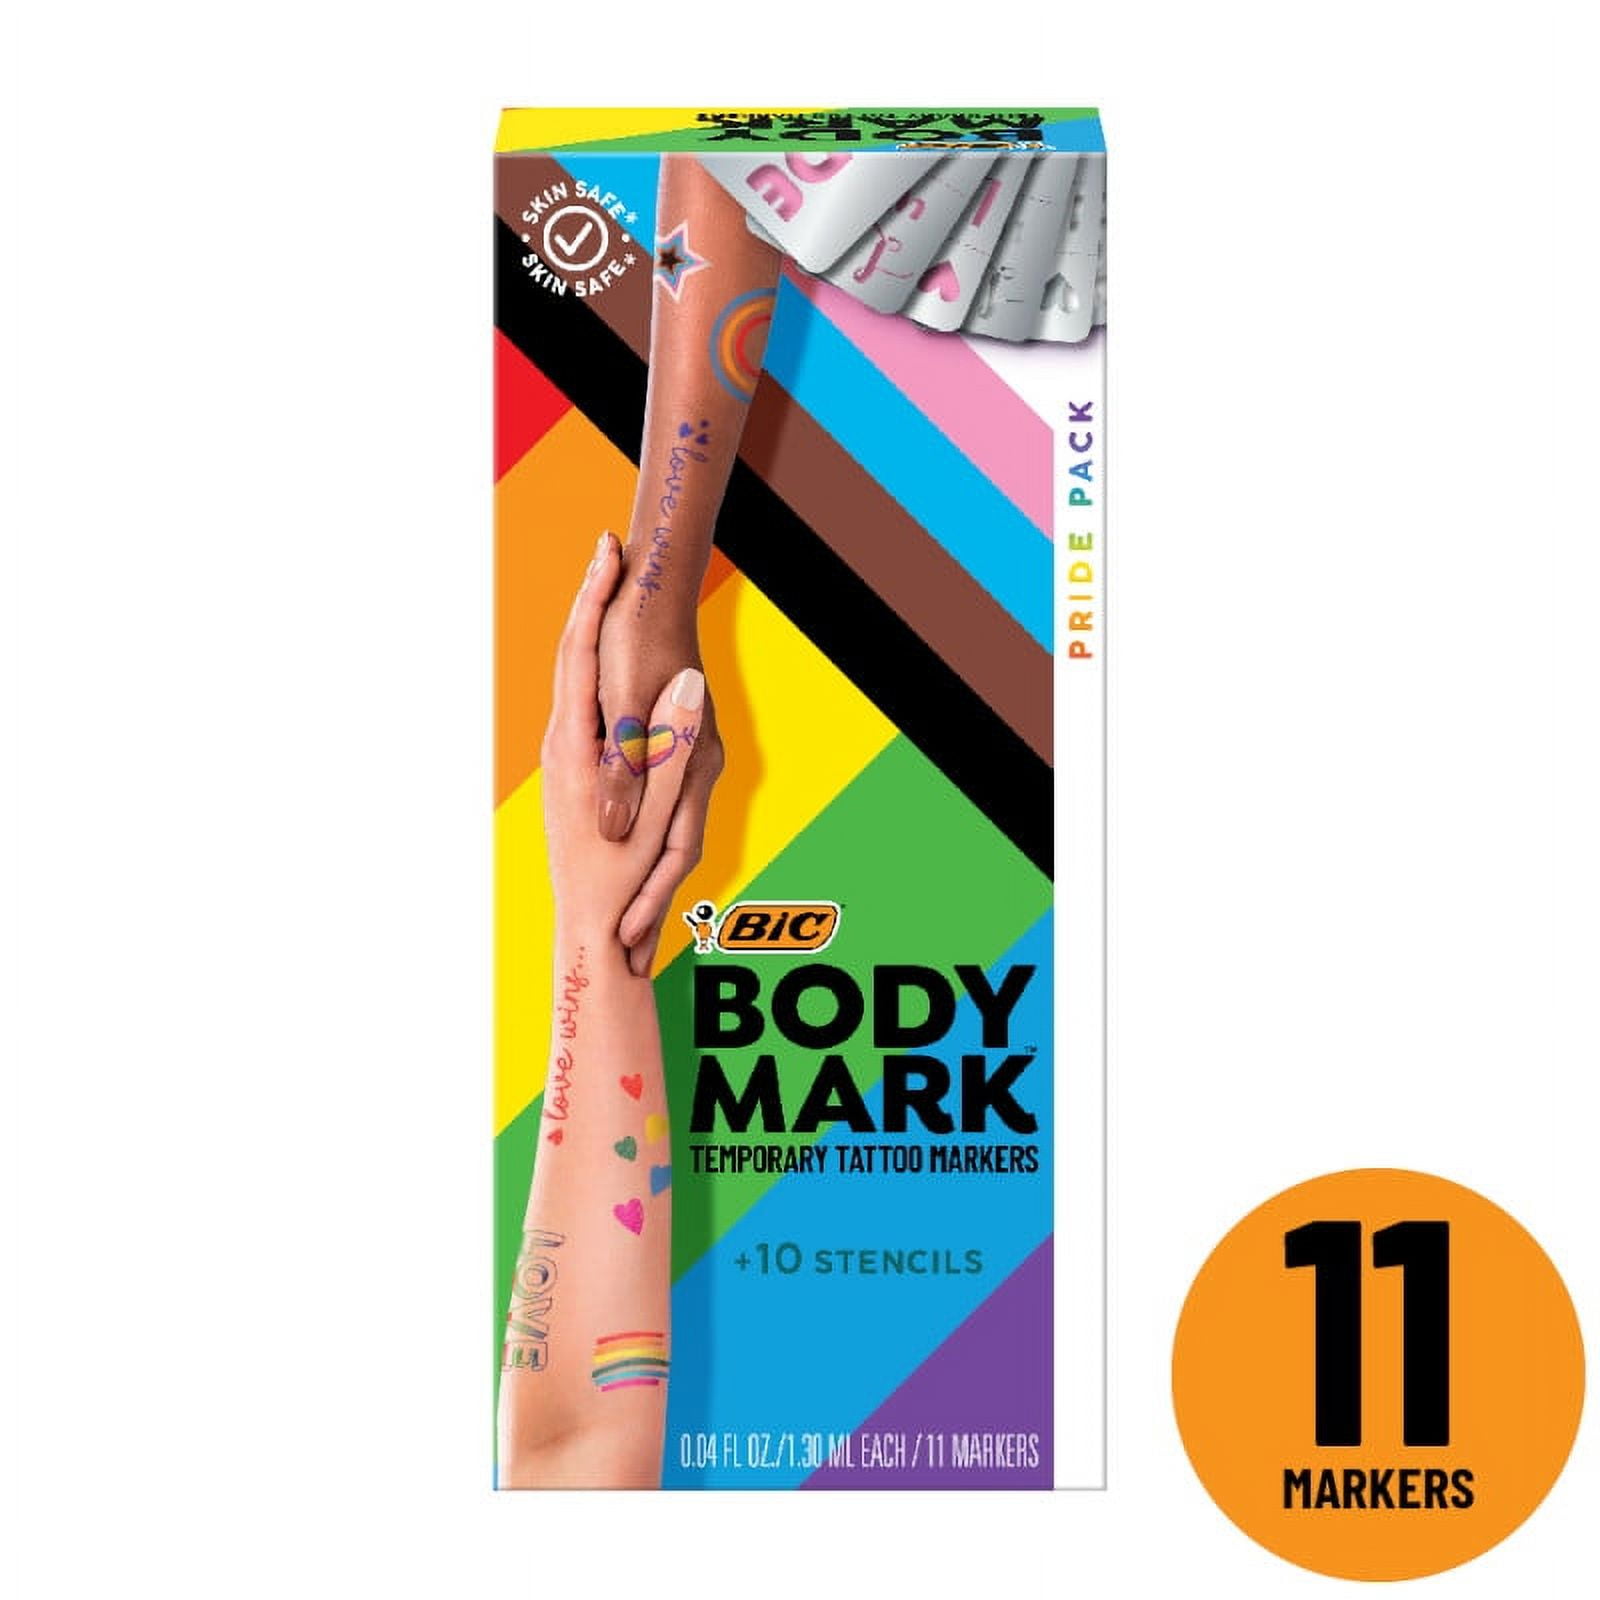 BodyMark Gift Set Temporary Tattoo Marker for Skin, Premium Brush Tip, 4  Count Pack of Assorted Colors and Stencils, Skin-Safe Temporary Tattoo  Marke - Imported Products from USA - iBhejo